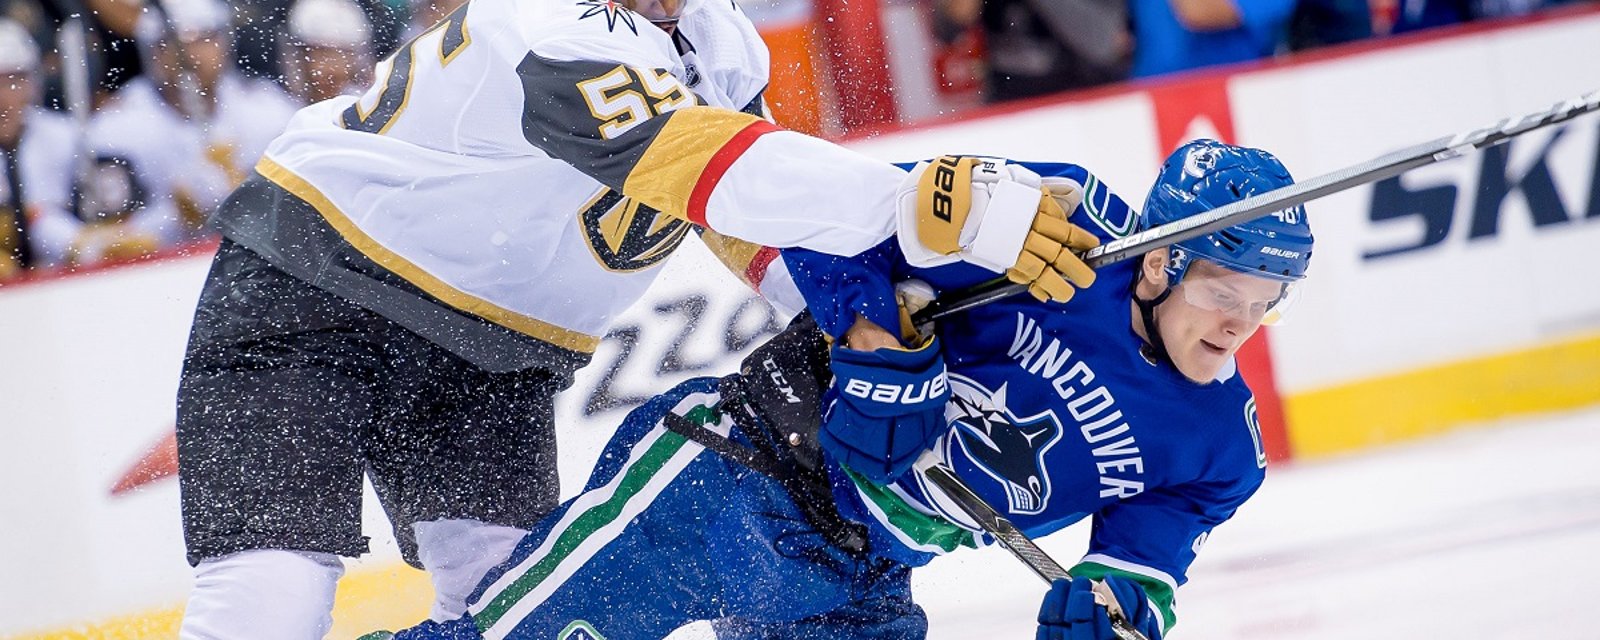 Canucks cut 7 players from camp, including 1st round pick Olli Juolevi.